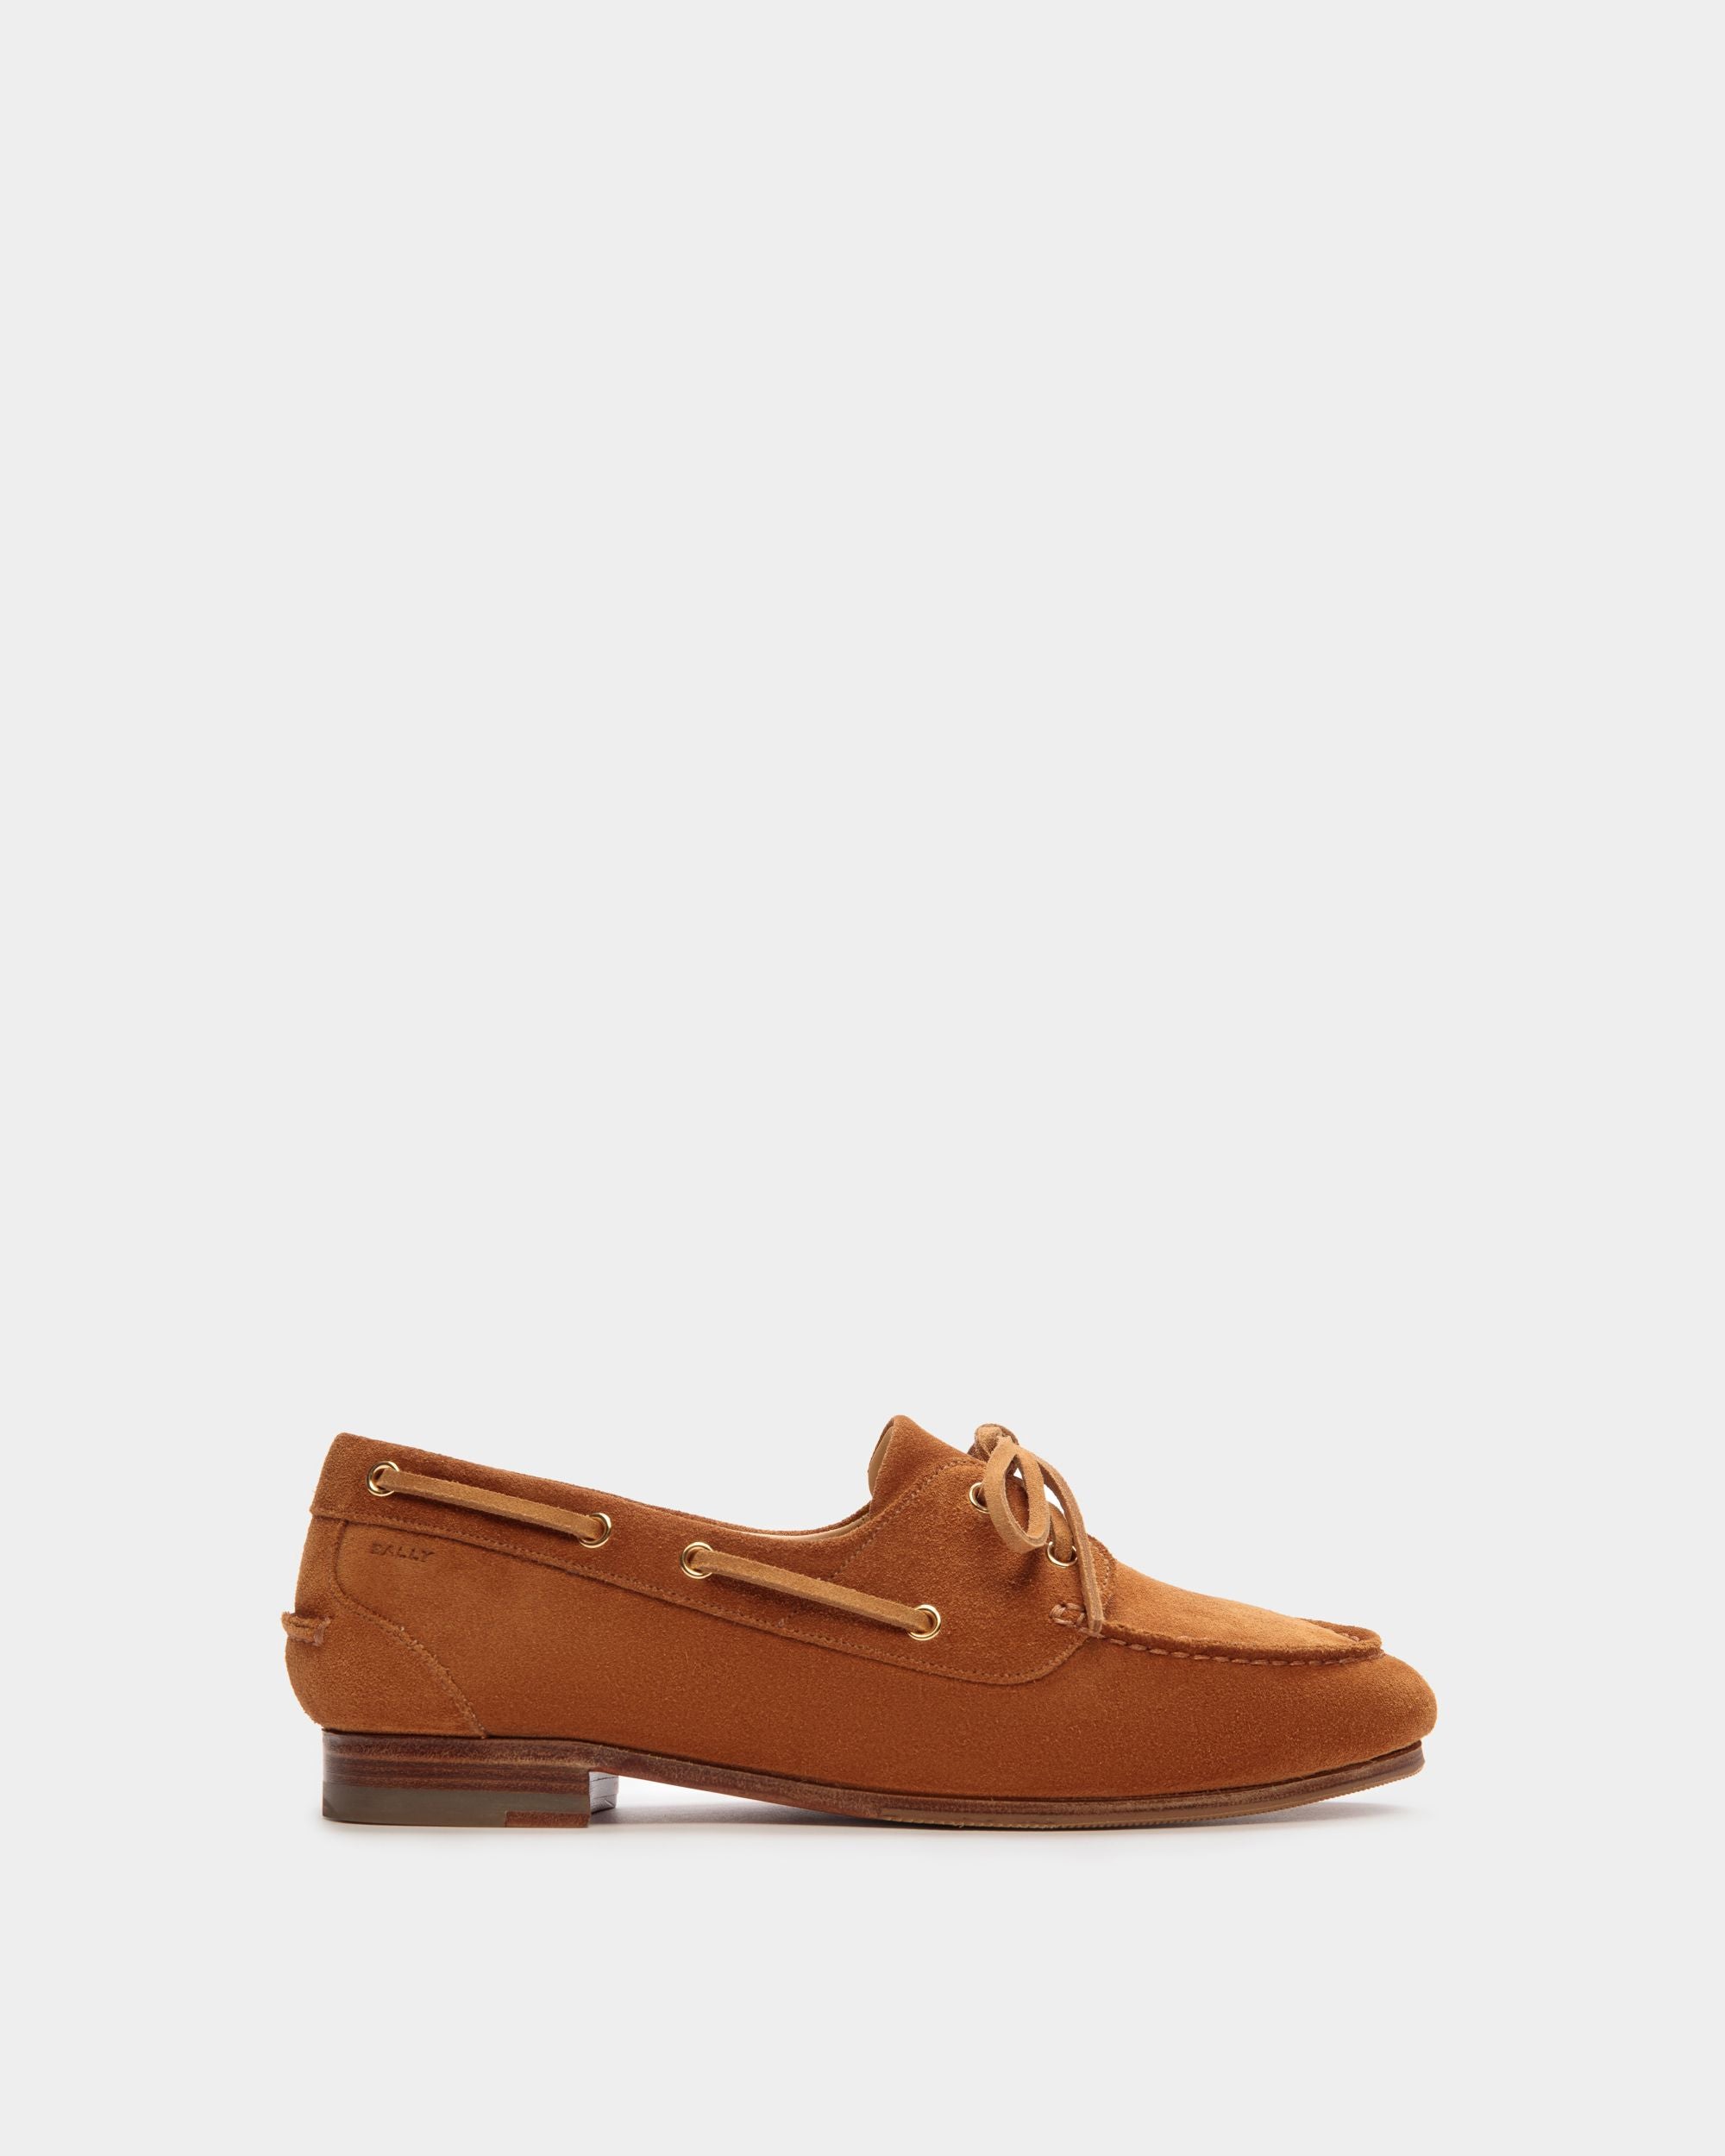 Plume | Women's Moccasin in Brown Suede | Bally | Still Life Side